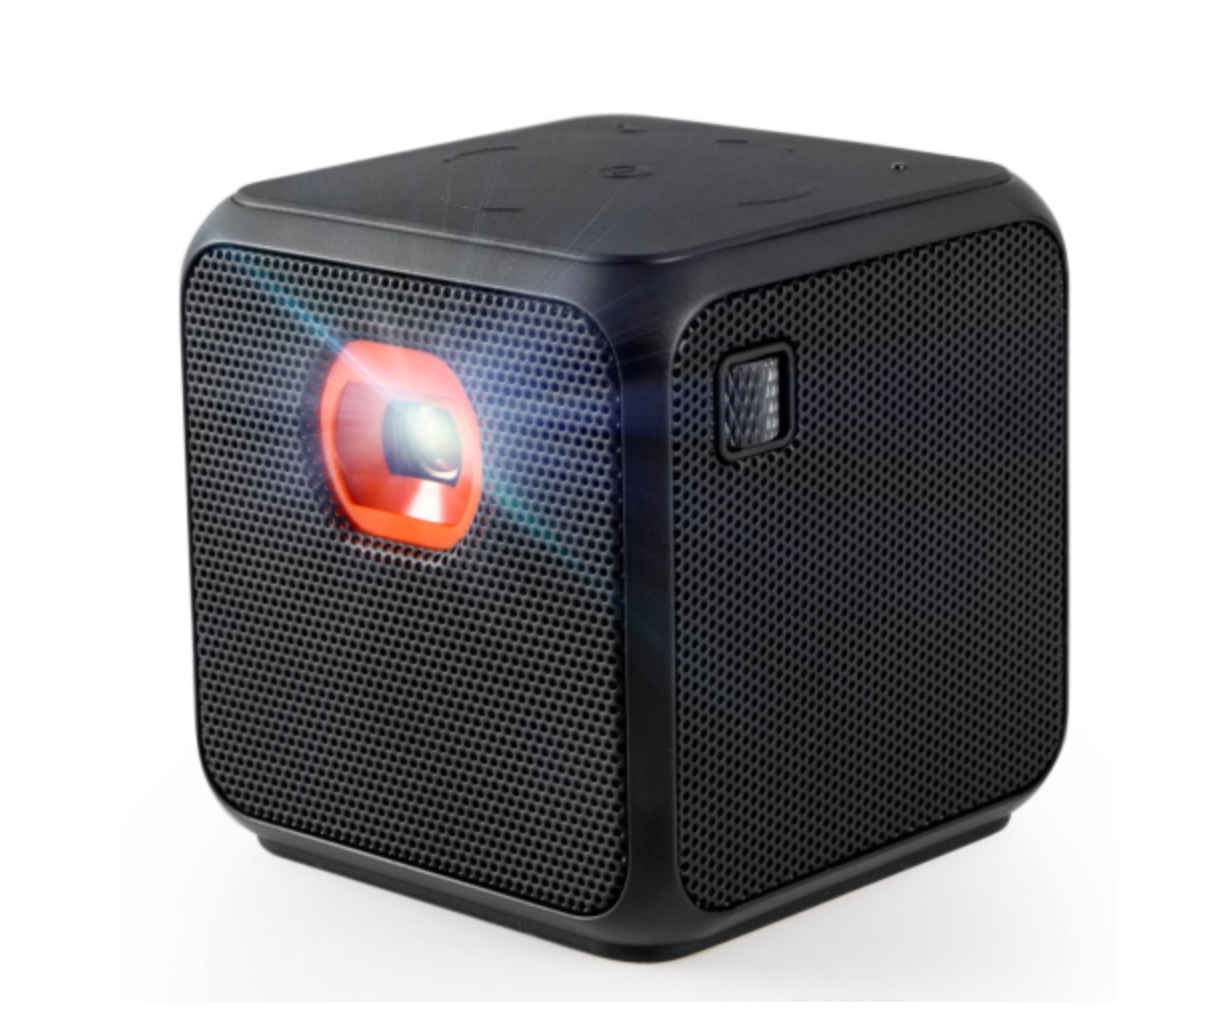 gifts for the cook - xprit portable projector